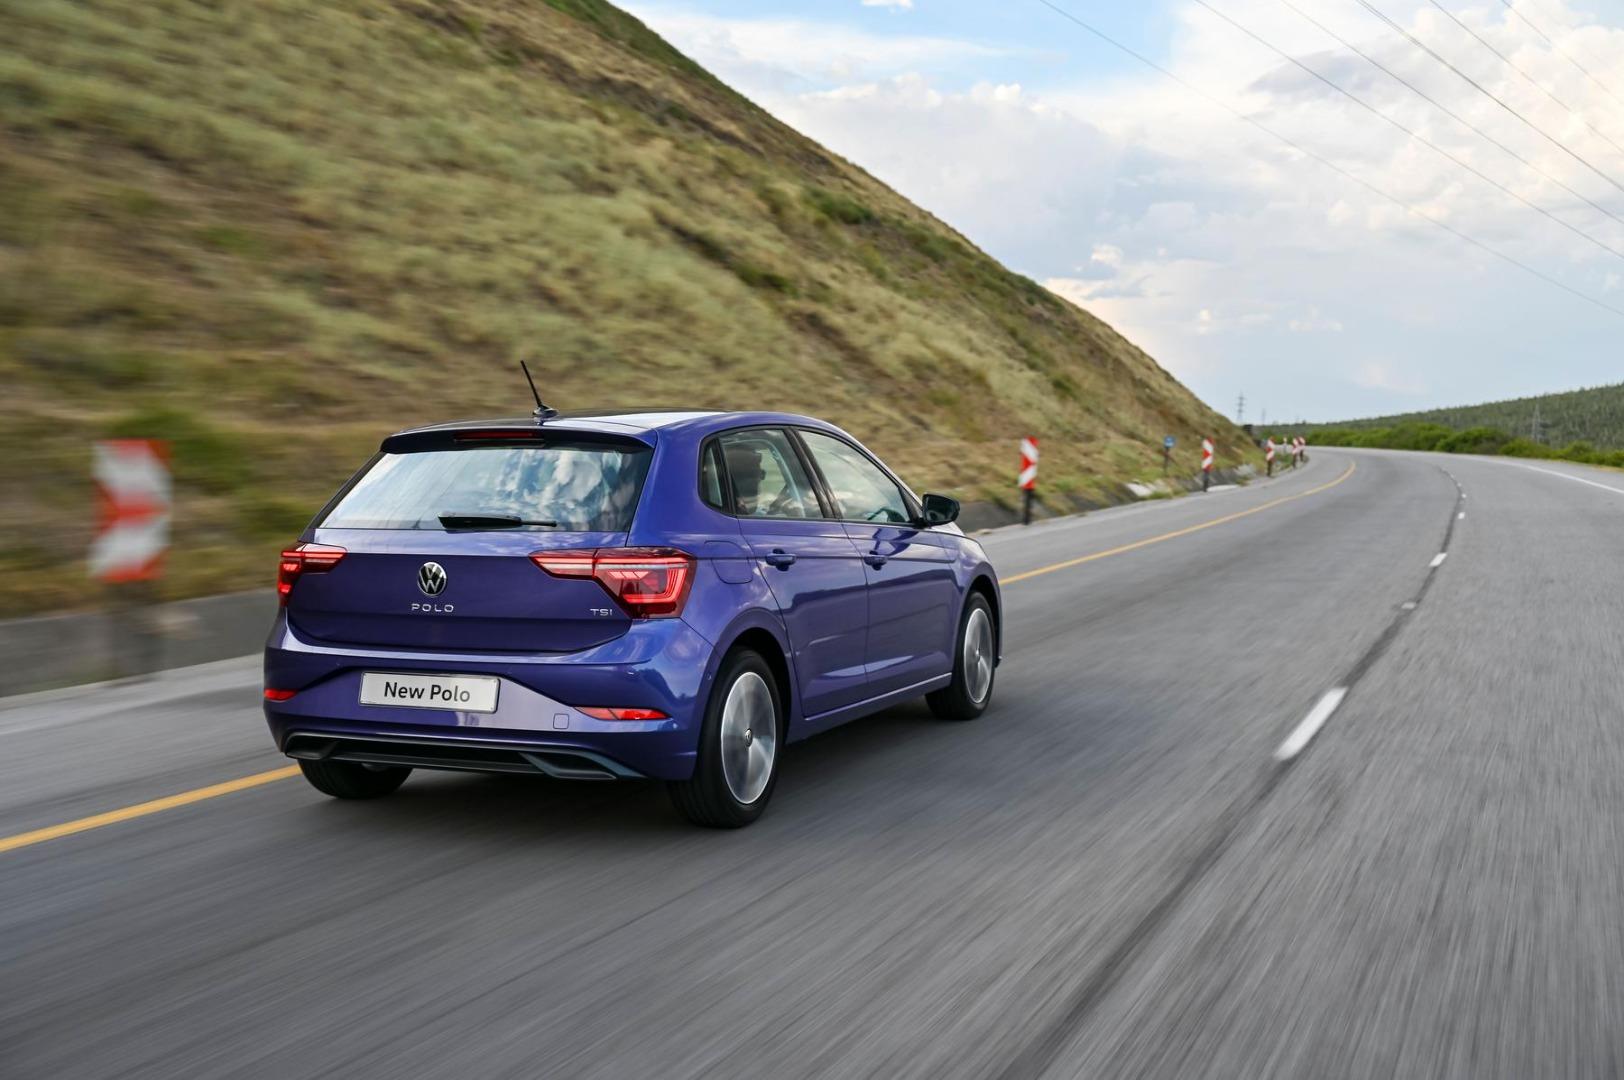 audi a1 vs volkswagen polo vs mini one: which has the lowest running costs?